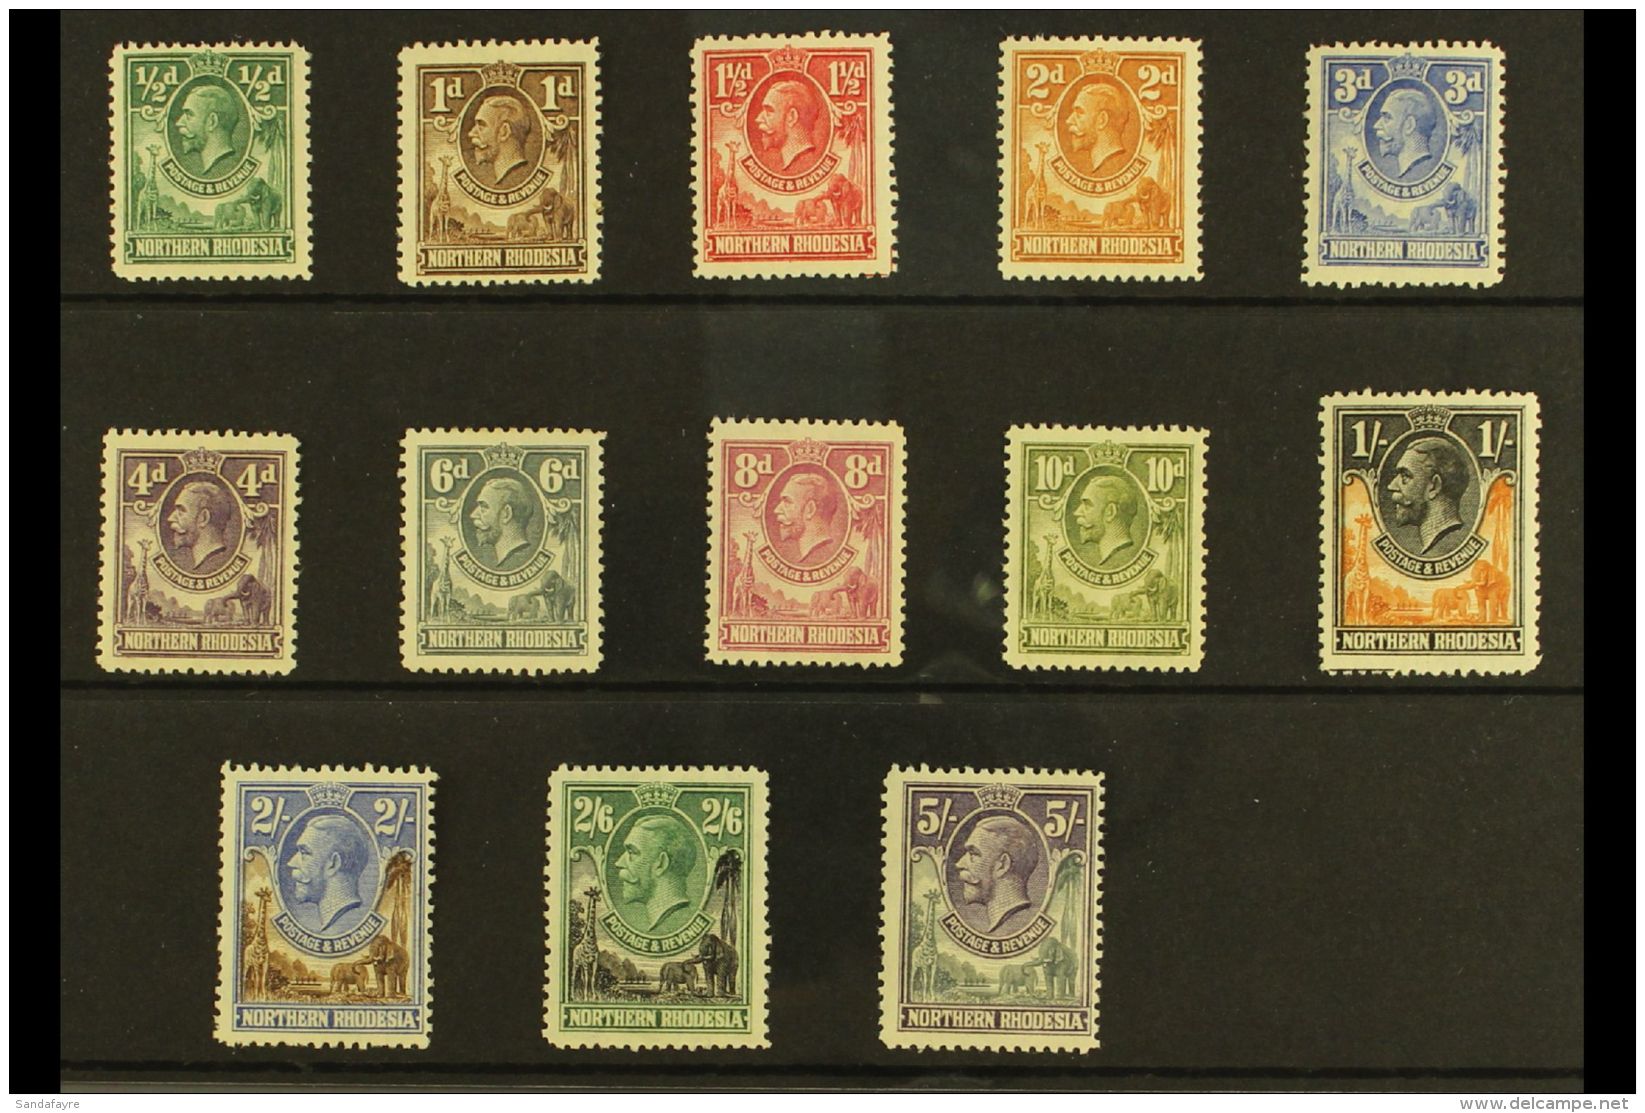 1925-29 KGV Definitive Set To 2s6d (SG 1/12), Plus 5s (SG 14), Fine Fresh Mint. (13 Stamps) For More Images,... - Northern Rhodesia (...-1963)